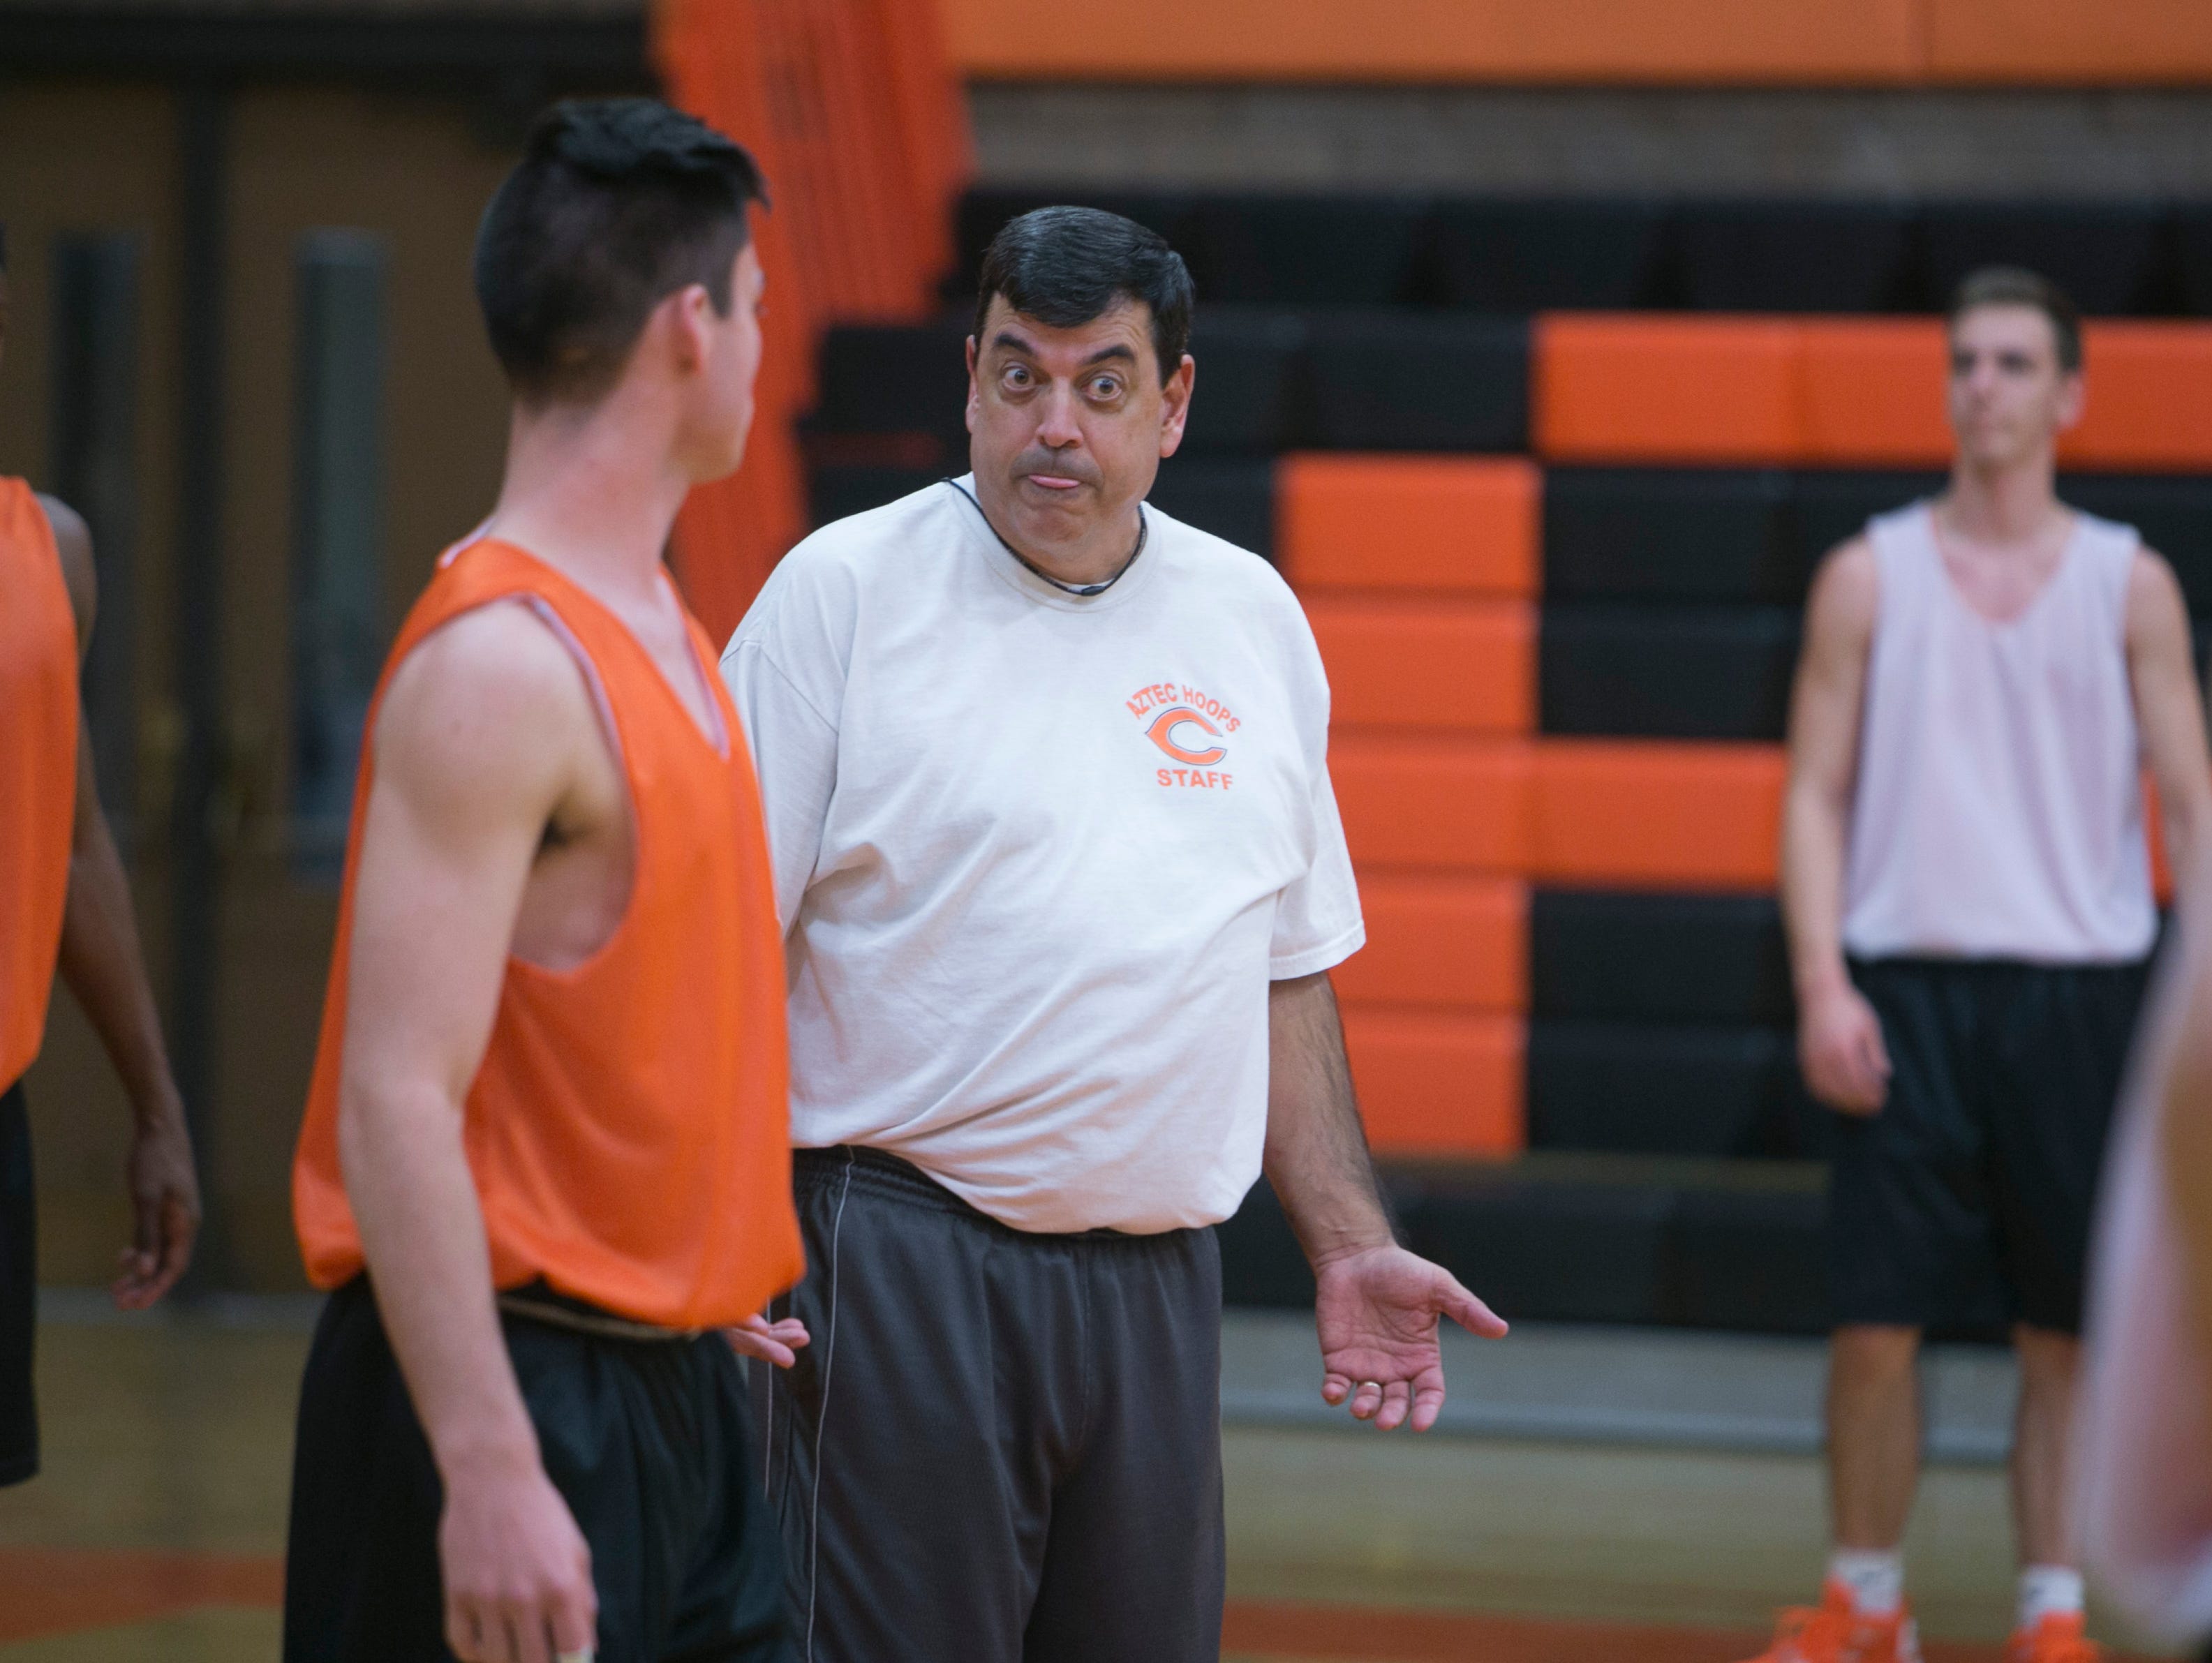 Corona del Sol's coach Neil MacDonald instructs the team during practice at Corona del Sol in Tempe on Nov. 9, 2015.